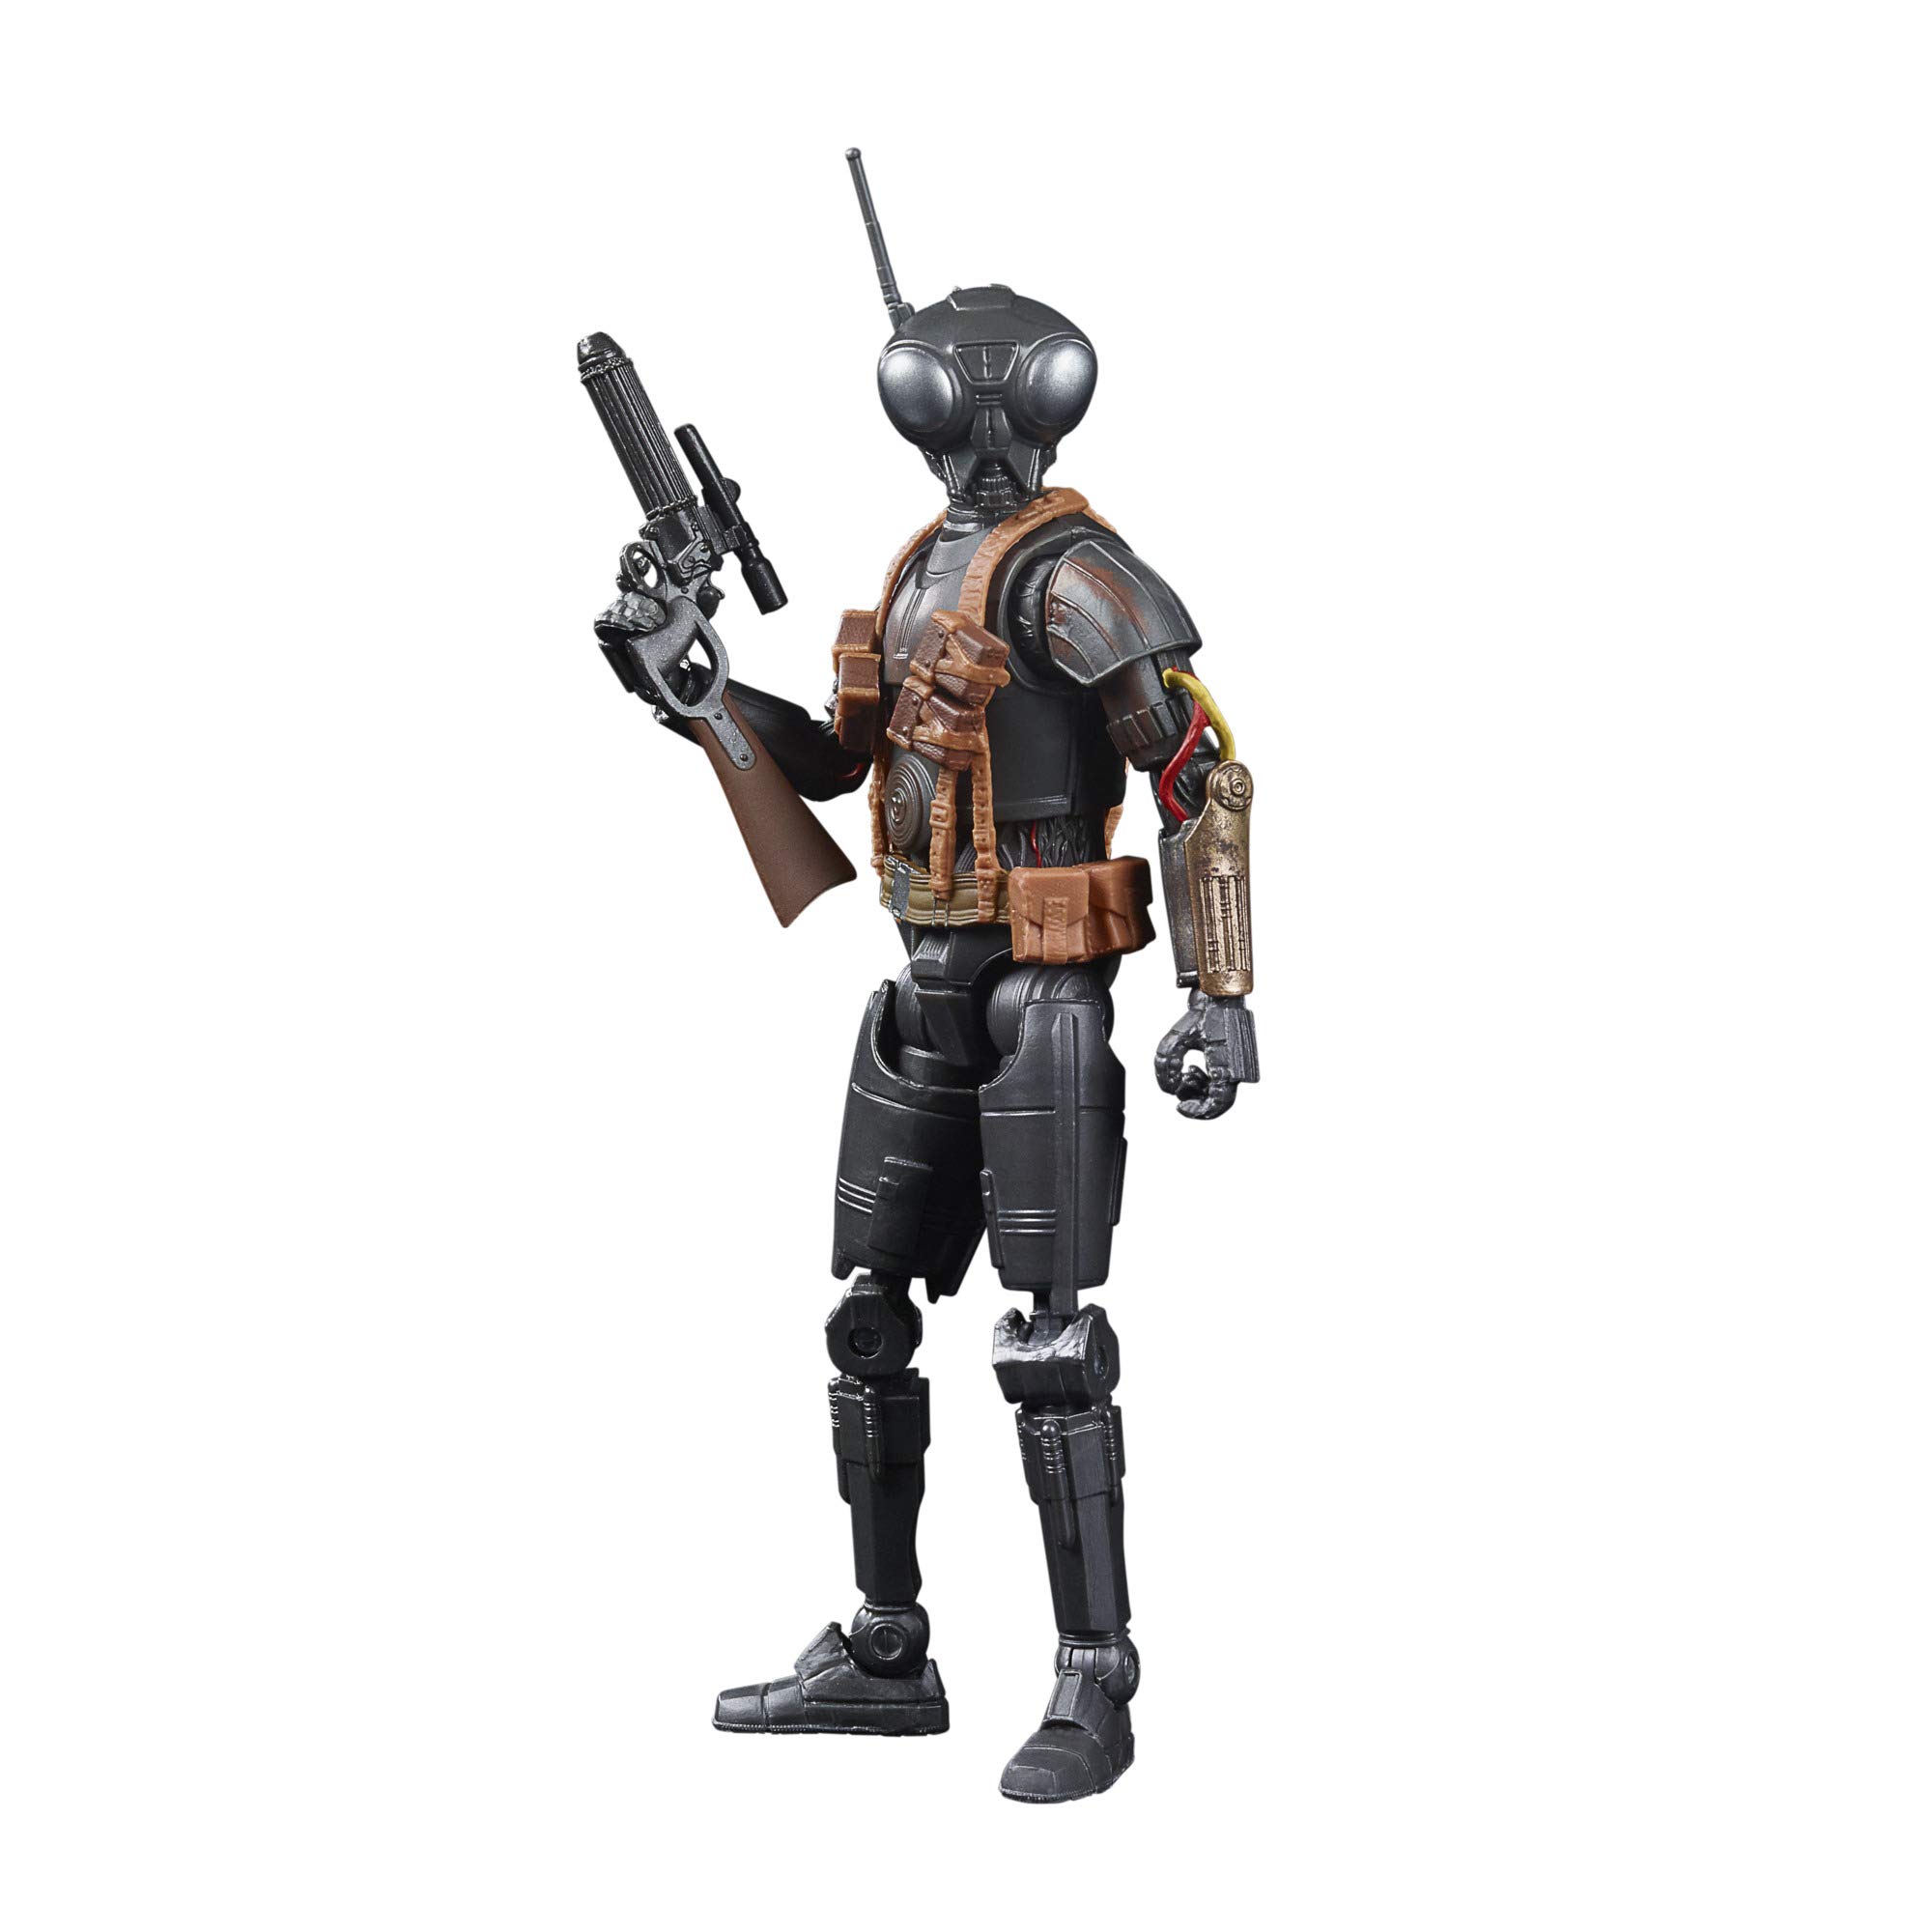 STAR WARS The Black Series Q9-0 (Zero) Toy 6-Inch-Scale The Mandalorian Collectible Figure with Accessories, Toys for Kids Ages 4 and Up,F1868